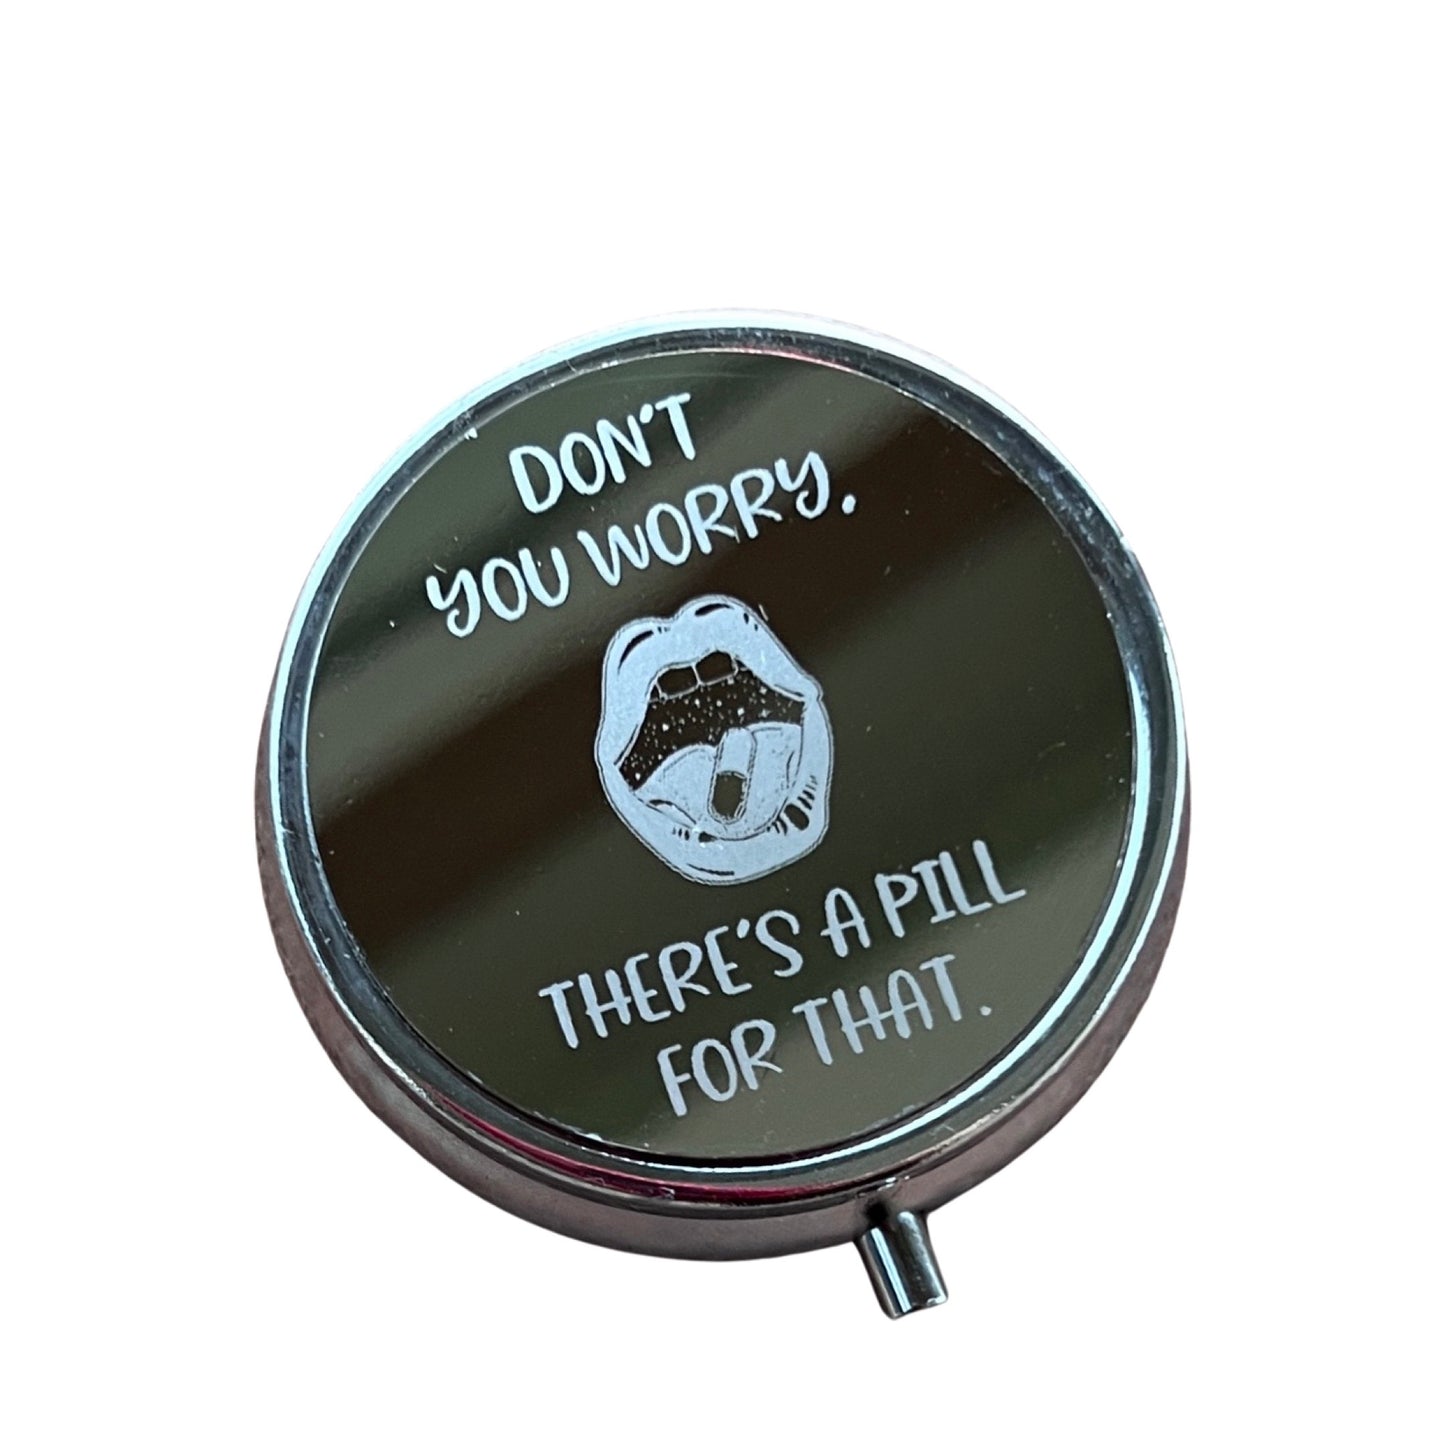 Don’t you worry, there’s a pill for that - Trinket | Medicine | Pill Box / Case